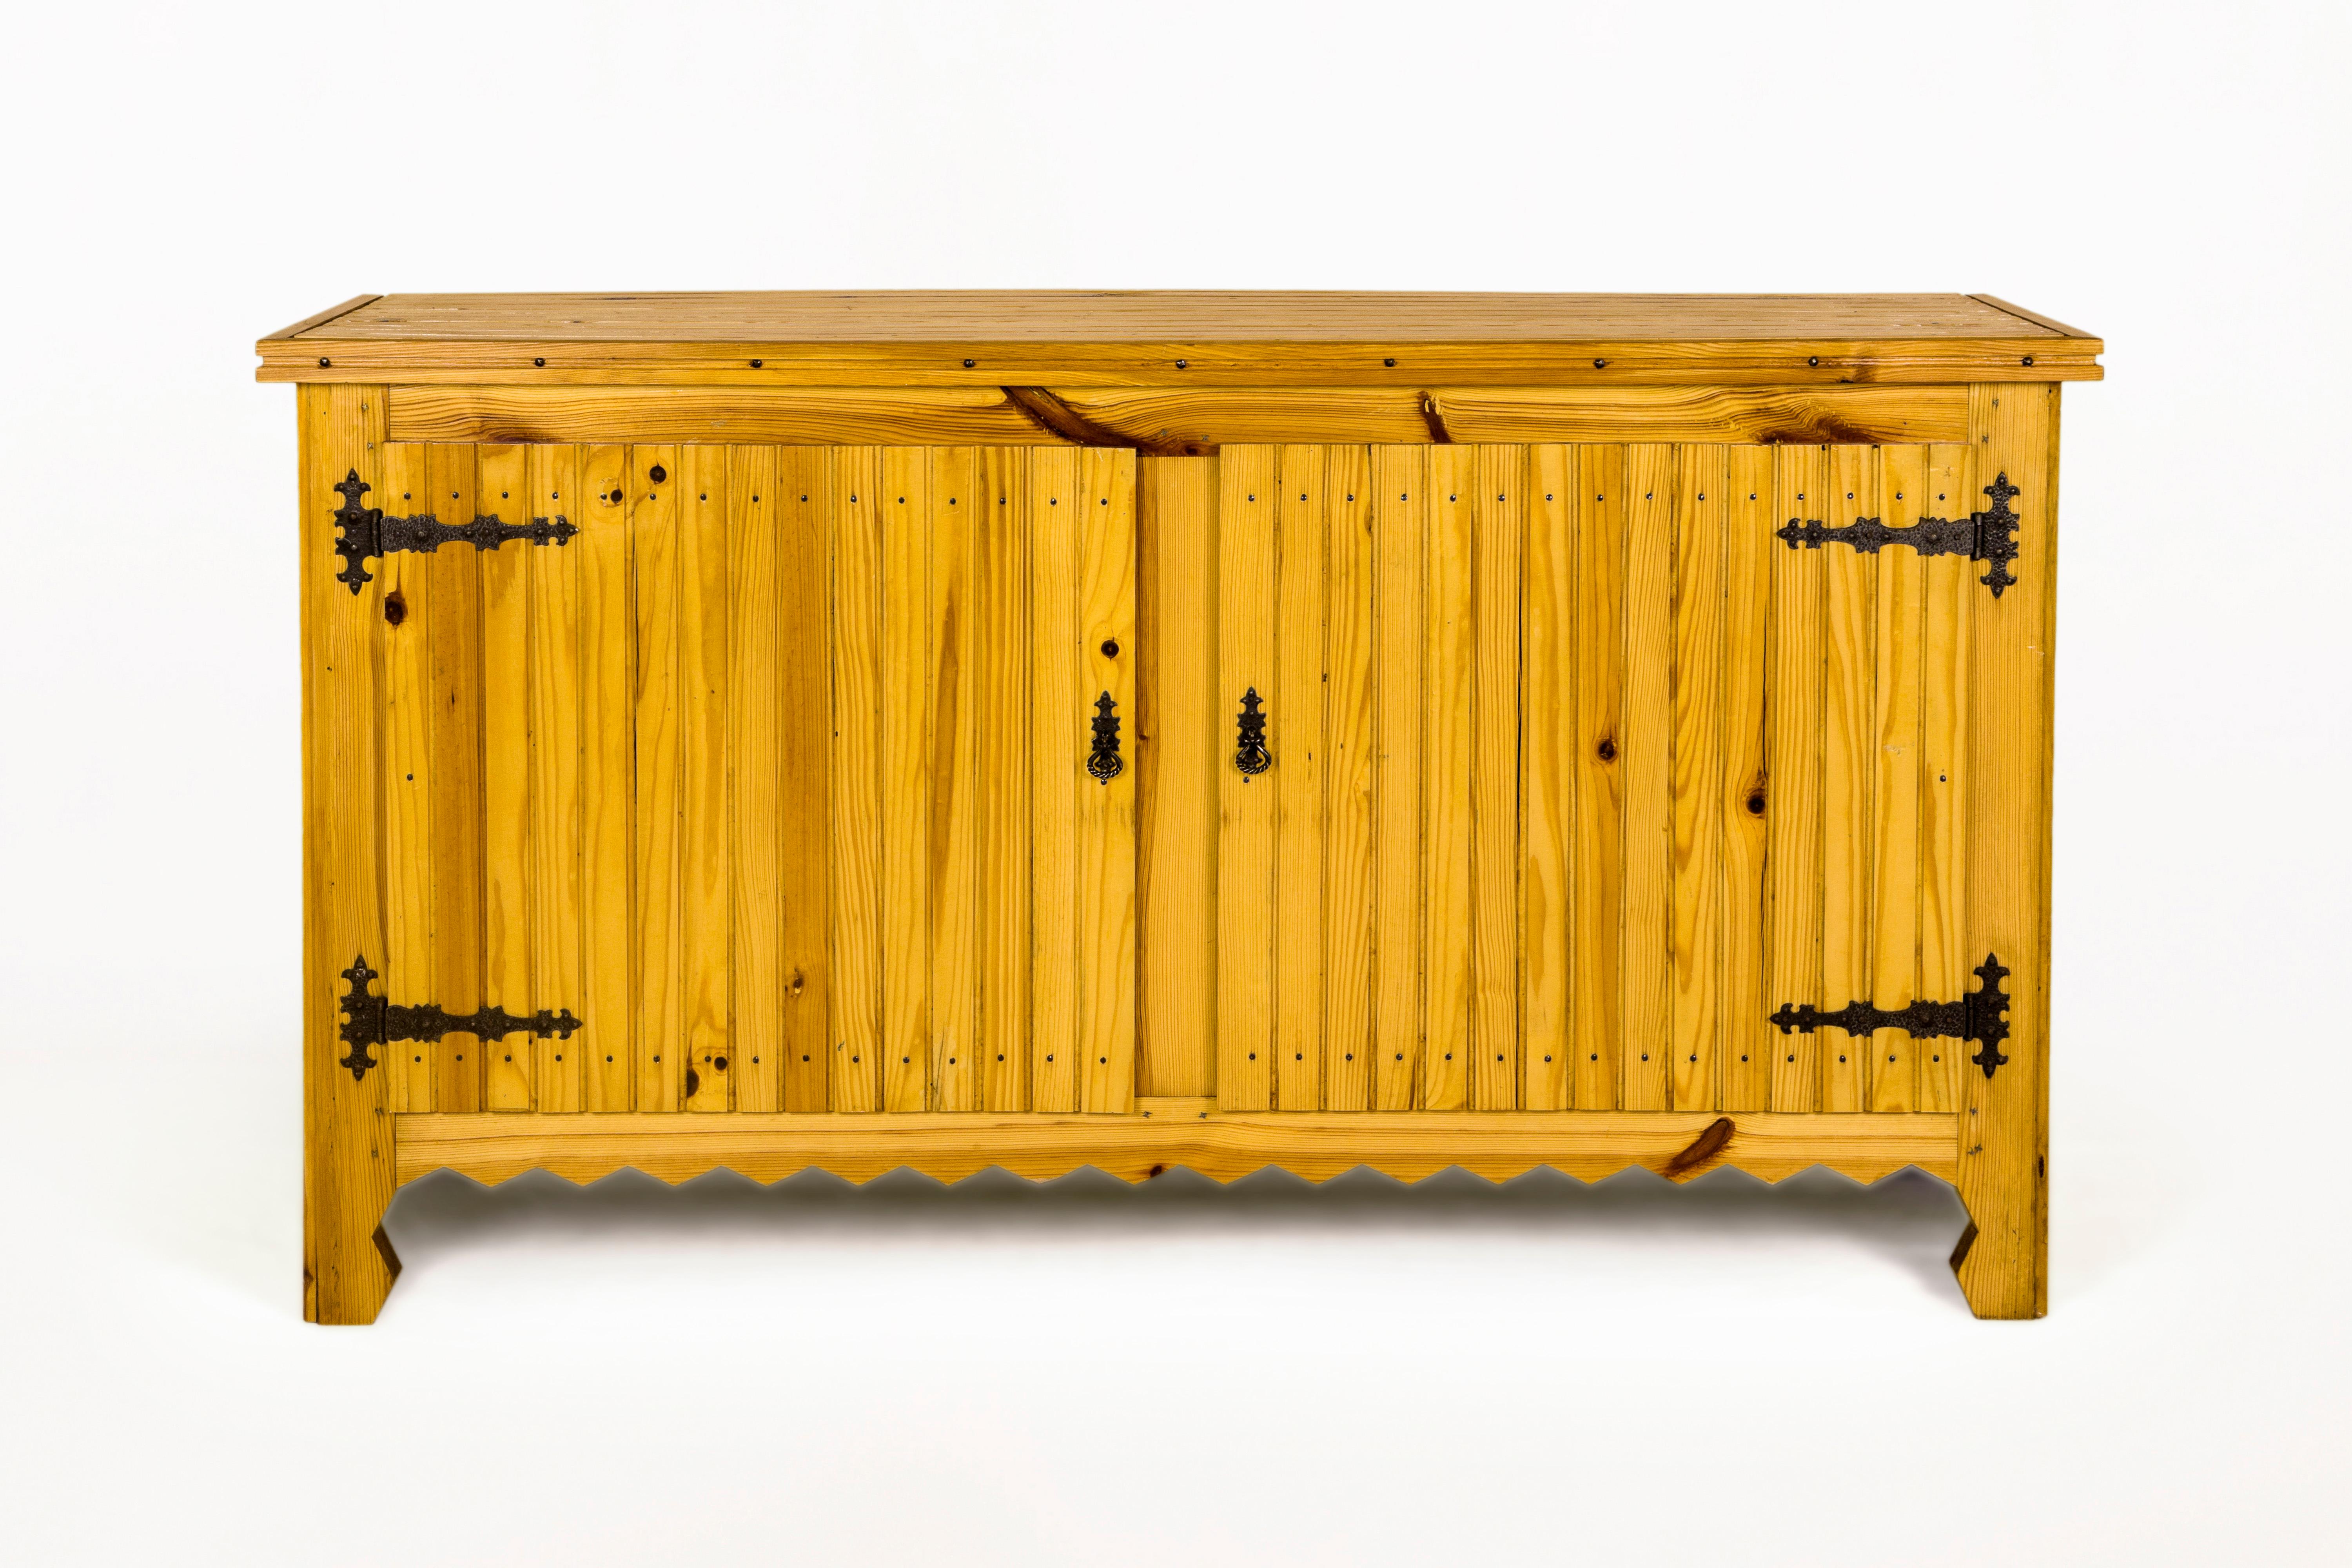 Pair of sideboards.
Made with pine.
Handcrafted iron work.
Circa 1960, Italy.
Very good vintage condition.
Mid-Century Modern (MCM) is a design movement in interior, product, graphic design, architecture, and urban development that was popular from